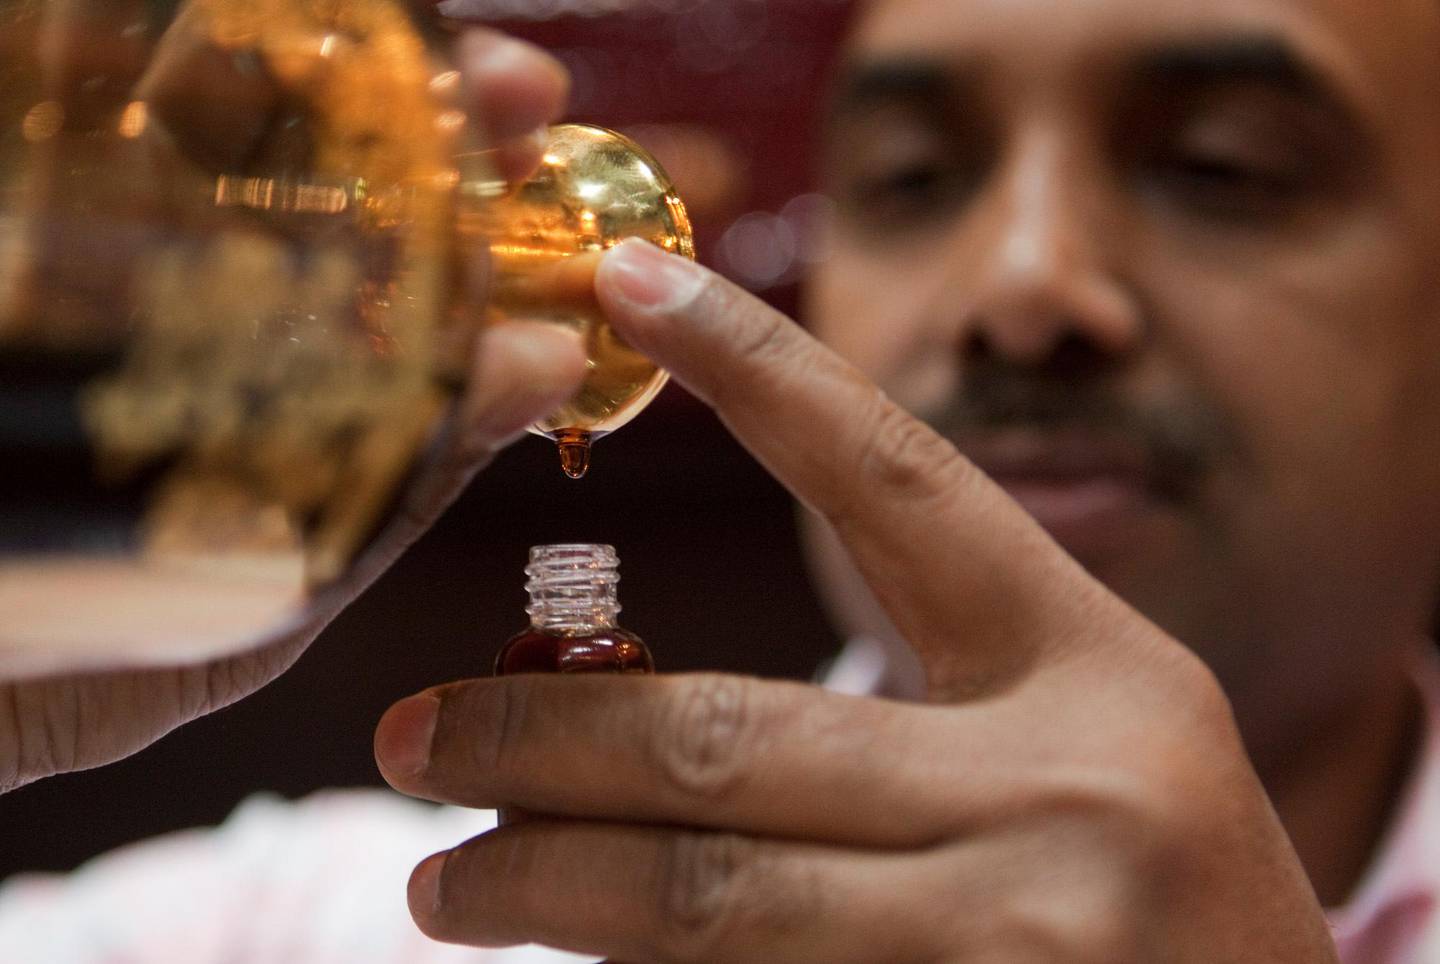 September 17, 2011 - A employee from Areej Al Ameerat perfume bottles perfume made of Oud into smaller bottles during the Abu Dhabi International Hunting and Equestrian exhibition in Abu Dhabi, UAE. Pawel Dwulit / The National